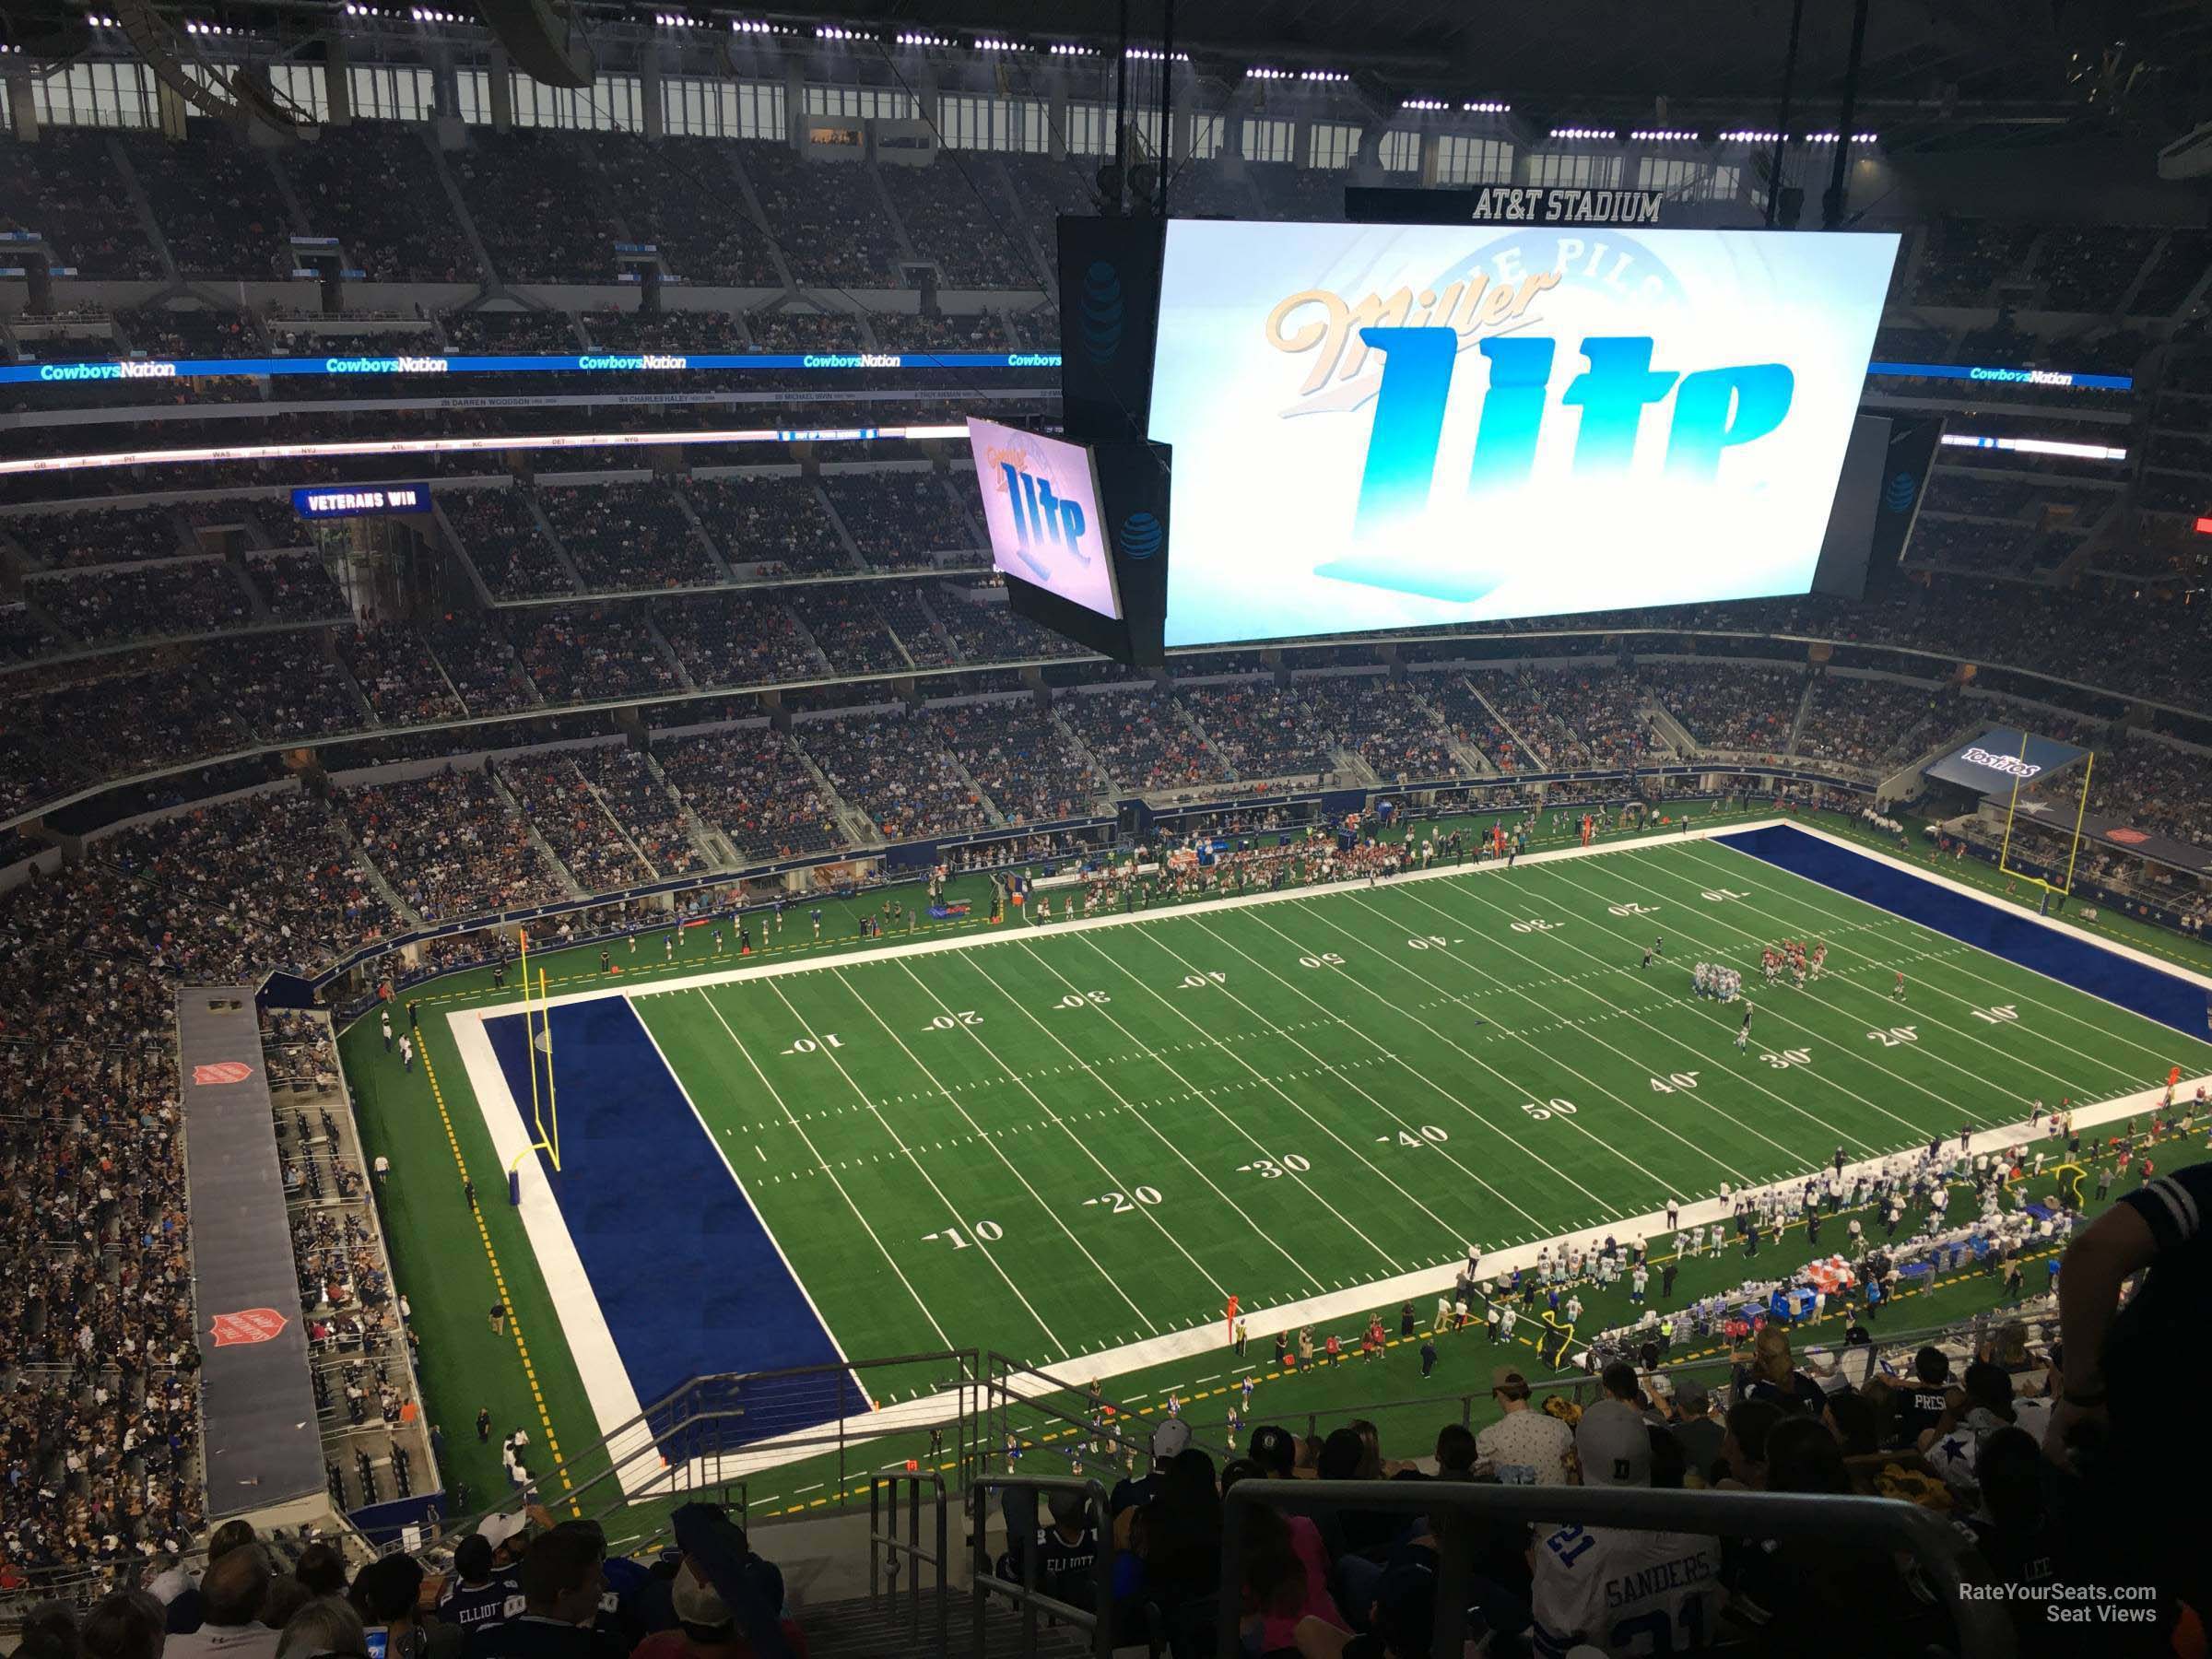 section 419, row 22 seat view  for football - at&t stadium (cowboys stadium)